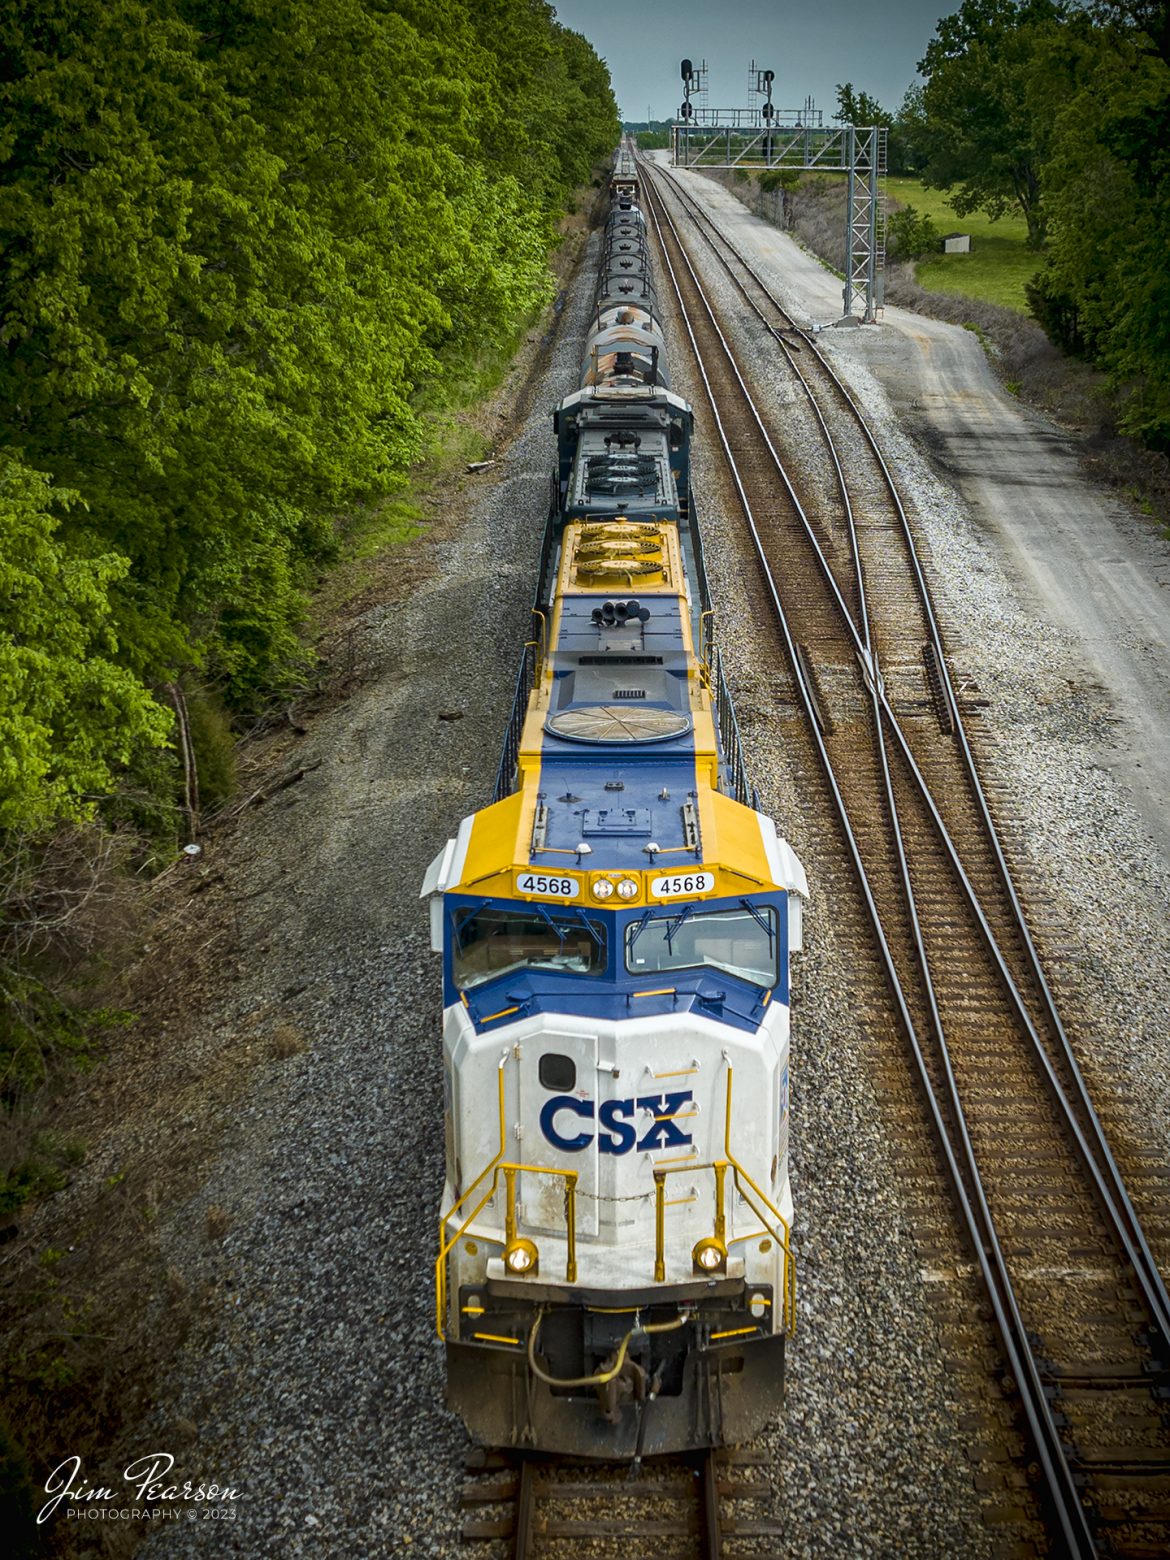 After just finishing setting out a bad order car at Casky, CSXT 50th Anniversary of Operation Lifesaver locomotive 4568 leads G412, as it pulls north from Casky Yard at Hopkinsville, Kentucky on May 10th, 2023, on the Henderson Subdivision.

Tech Info: DJI Mavic 3 Classic Drone, RAW, 24mm, f/2.8, 1/1000, ISO 130.

#trainphotography #railroadphotography #trains #railways #dronephotography #trainphotographer #railroadphotographer #jimpearsonphotography #mavic3classic #drones #trainsfromtheair #trainsfromadrone #coaltrain #CSXT #HopkinsvilleKy #CSXOperationLifesaver #CSXHendersonSubdivision